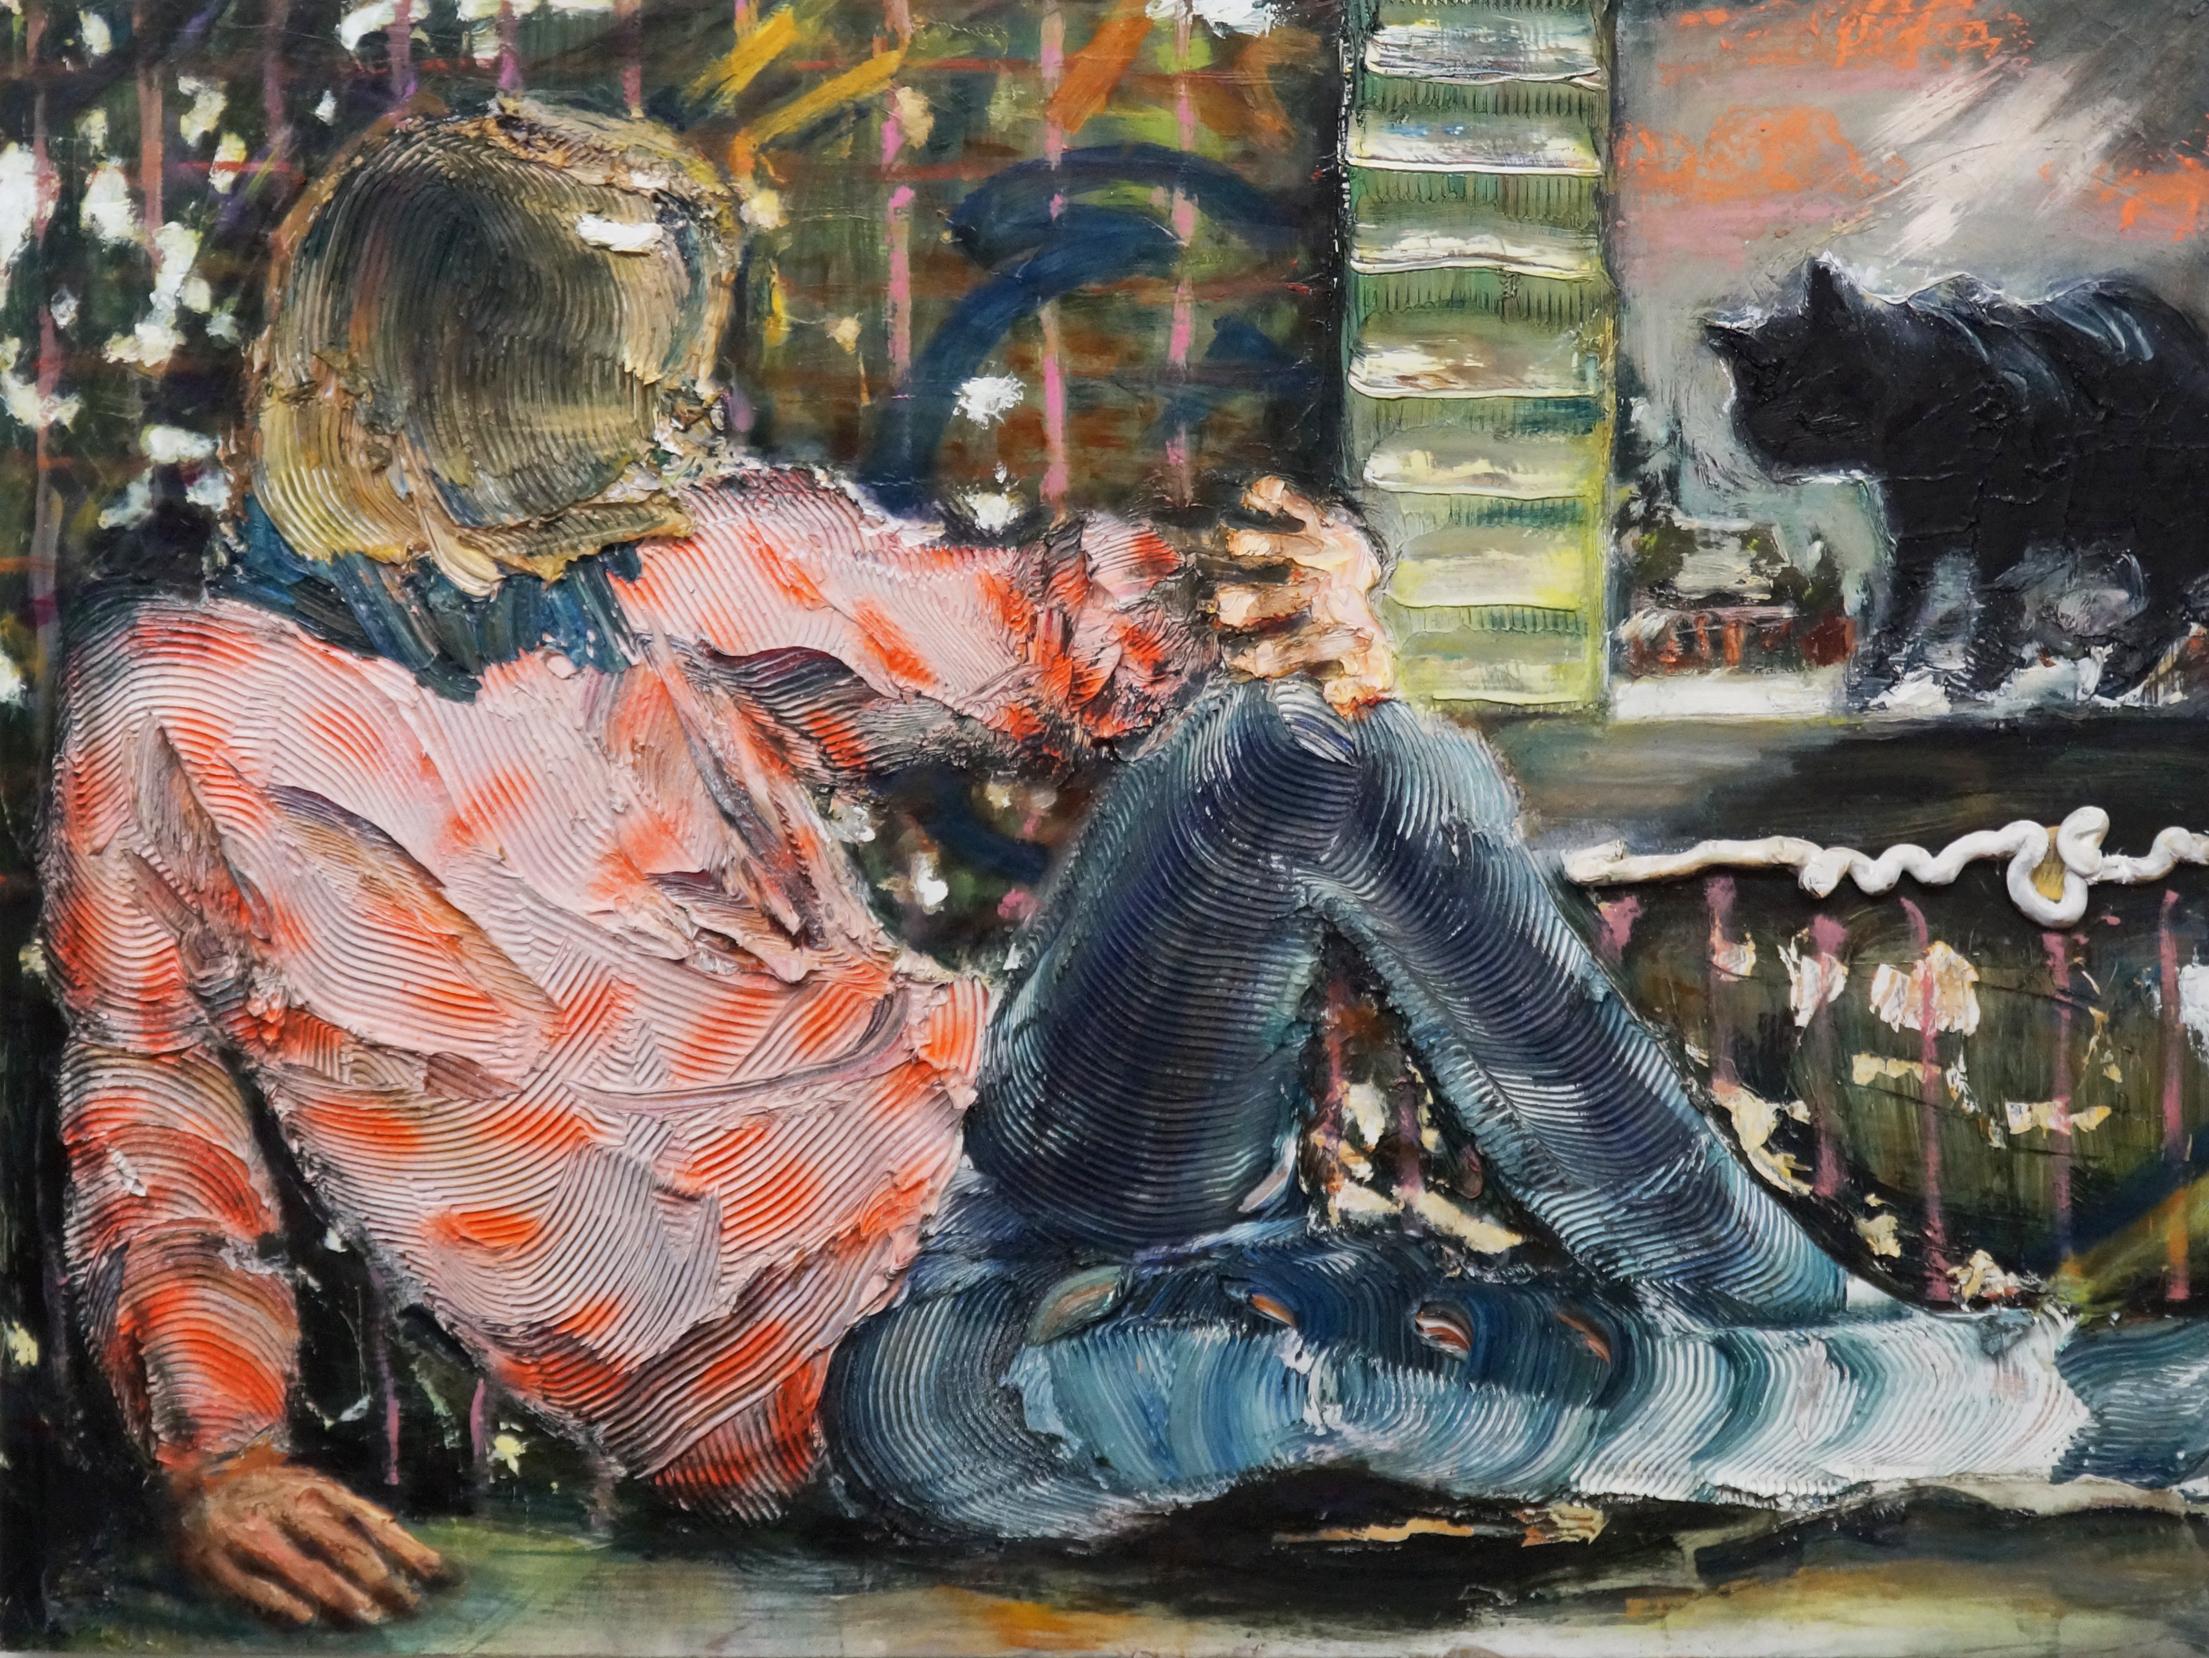 THE BLACK CAT - Textural figurative painting, woman reclining with black cat